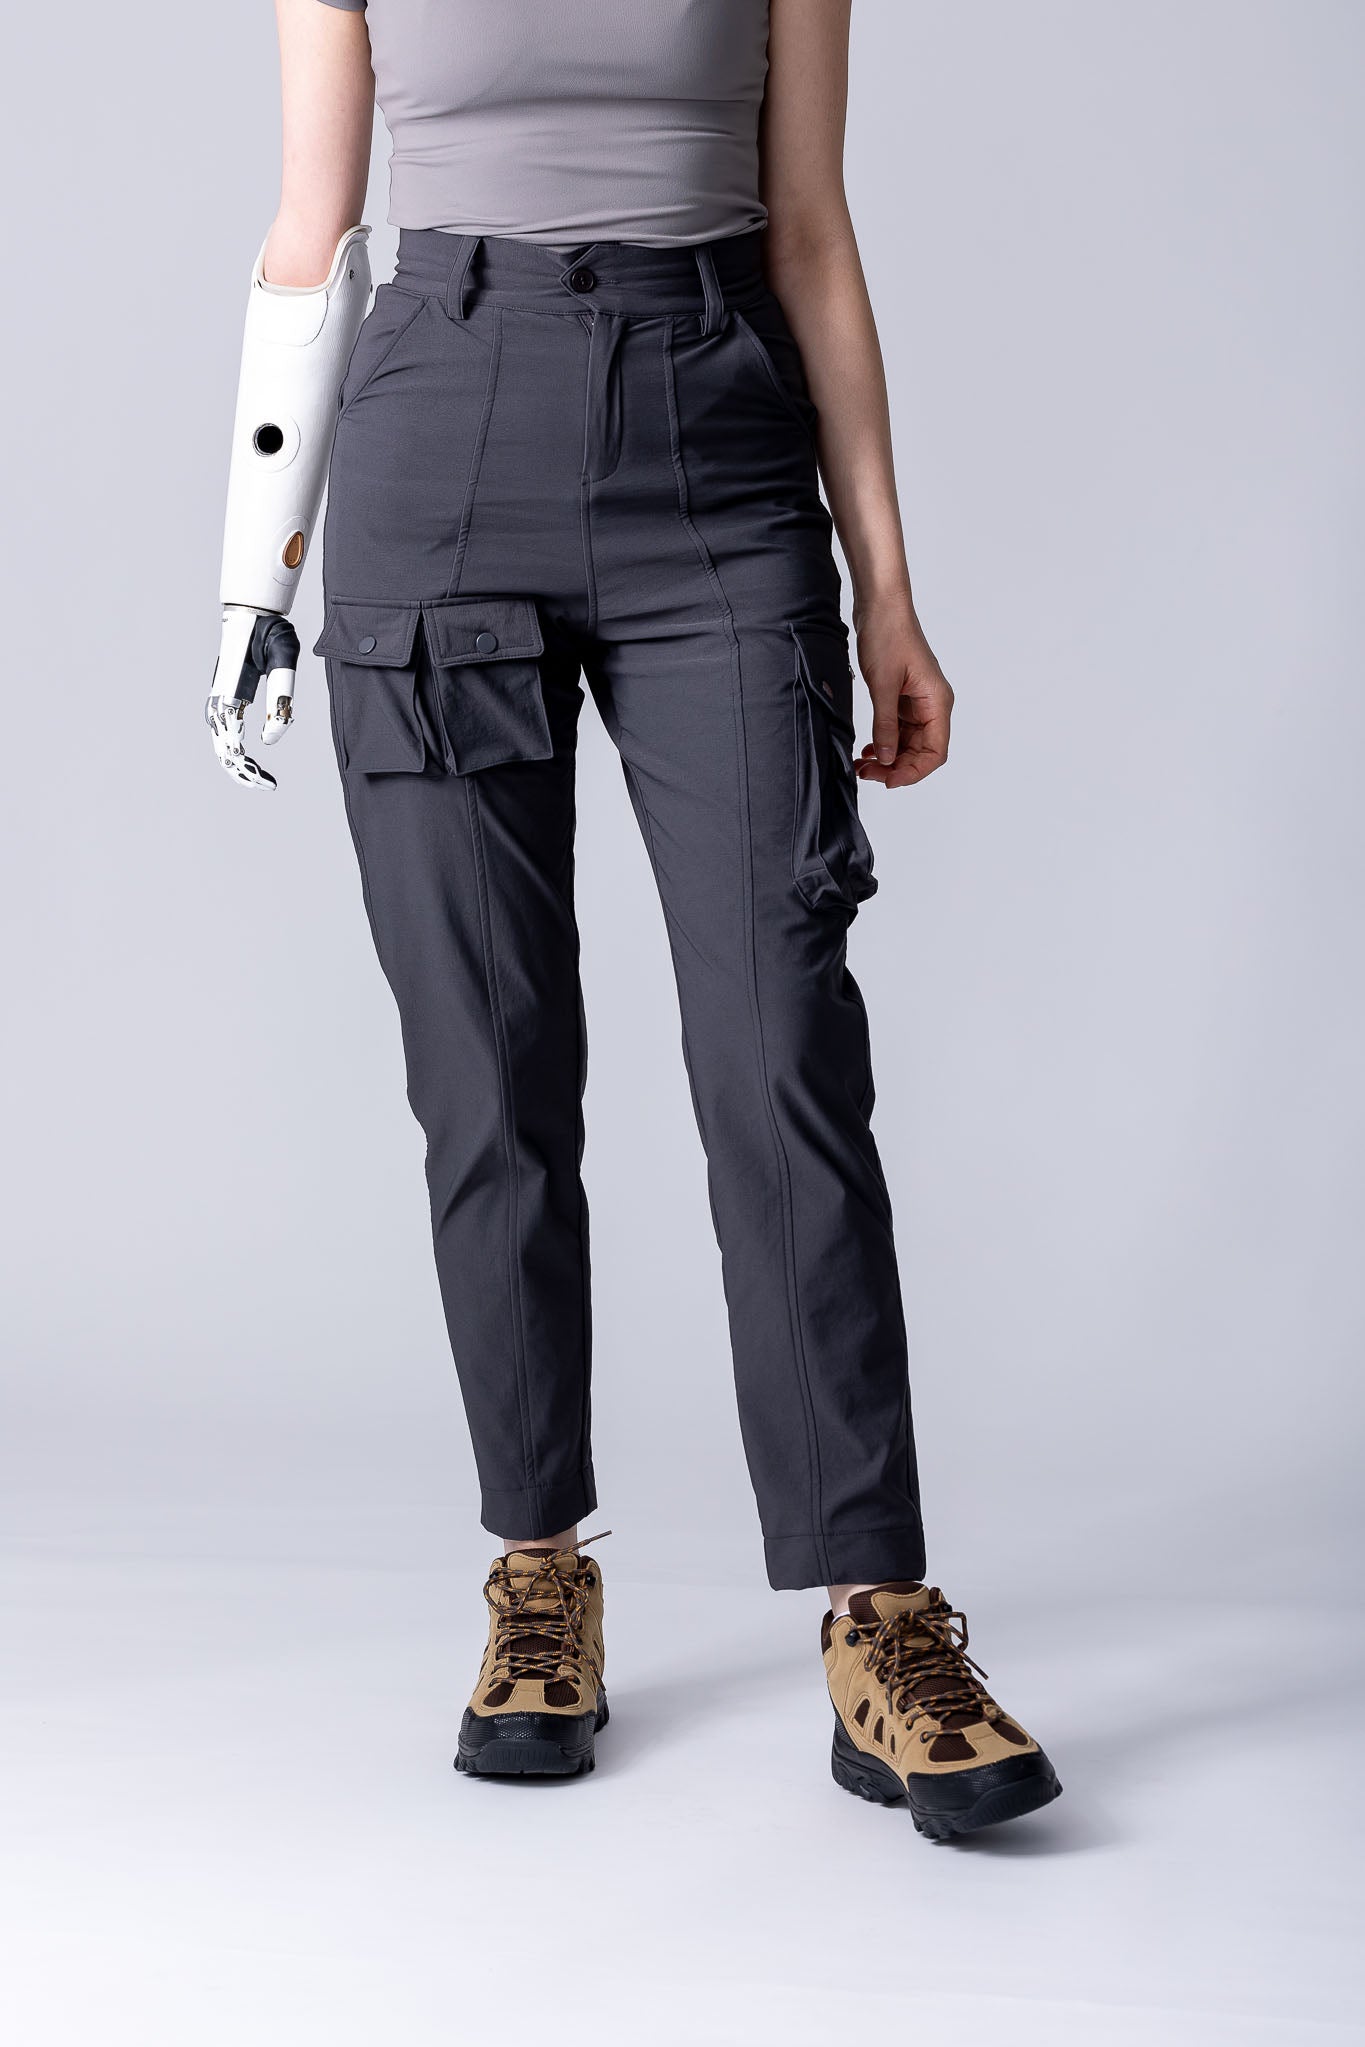 Safari cargo pants in charcoal. With stretchy fabric, extra leg pockets and back pockets. 